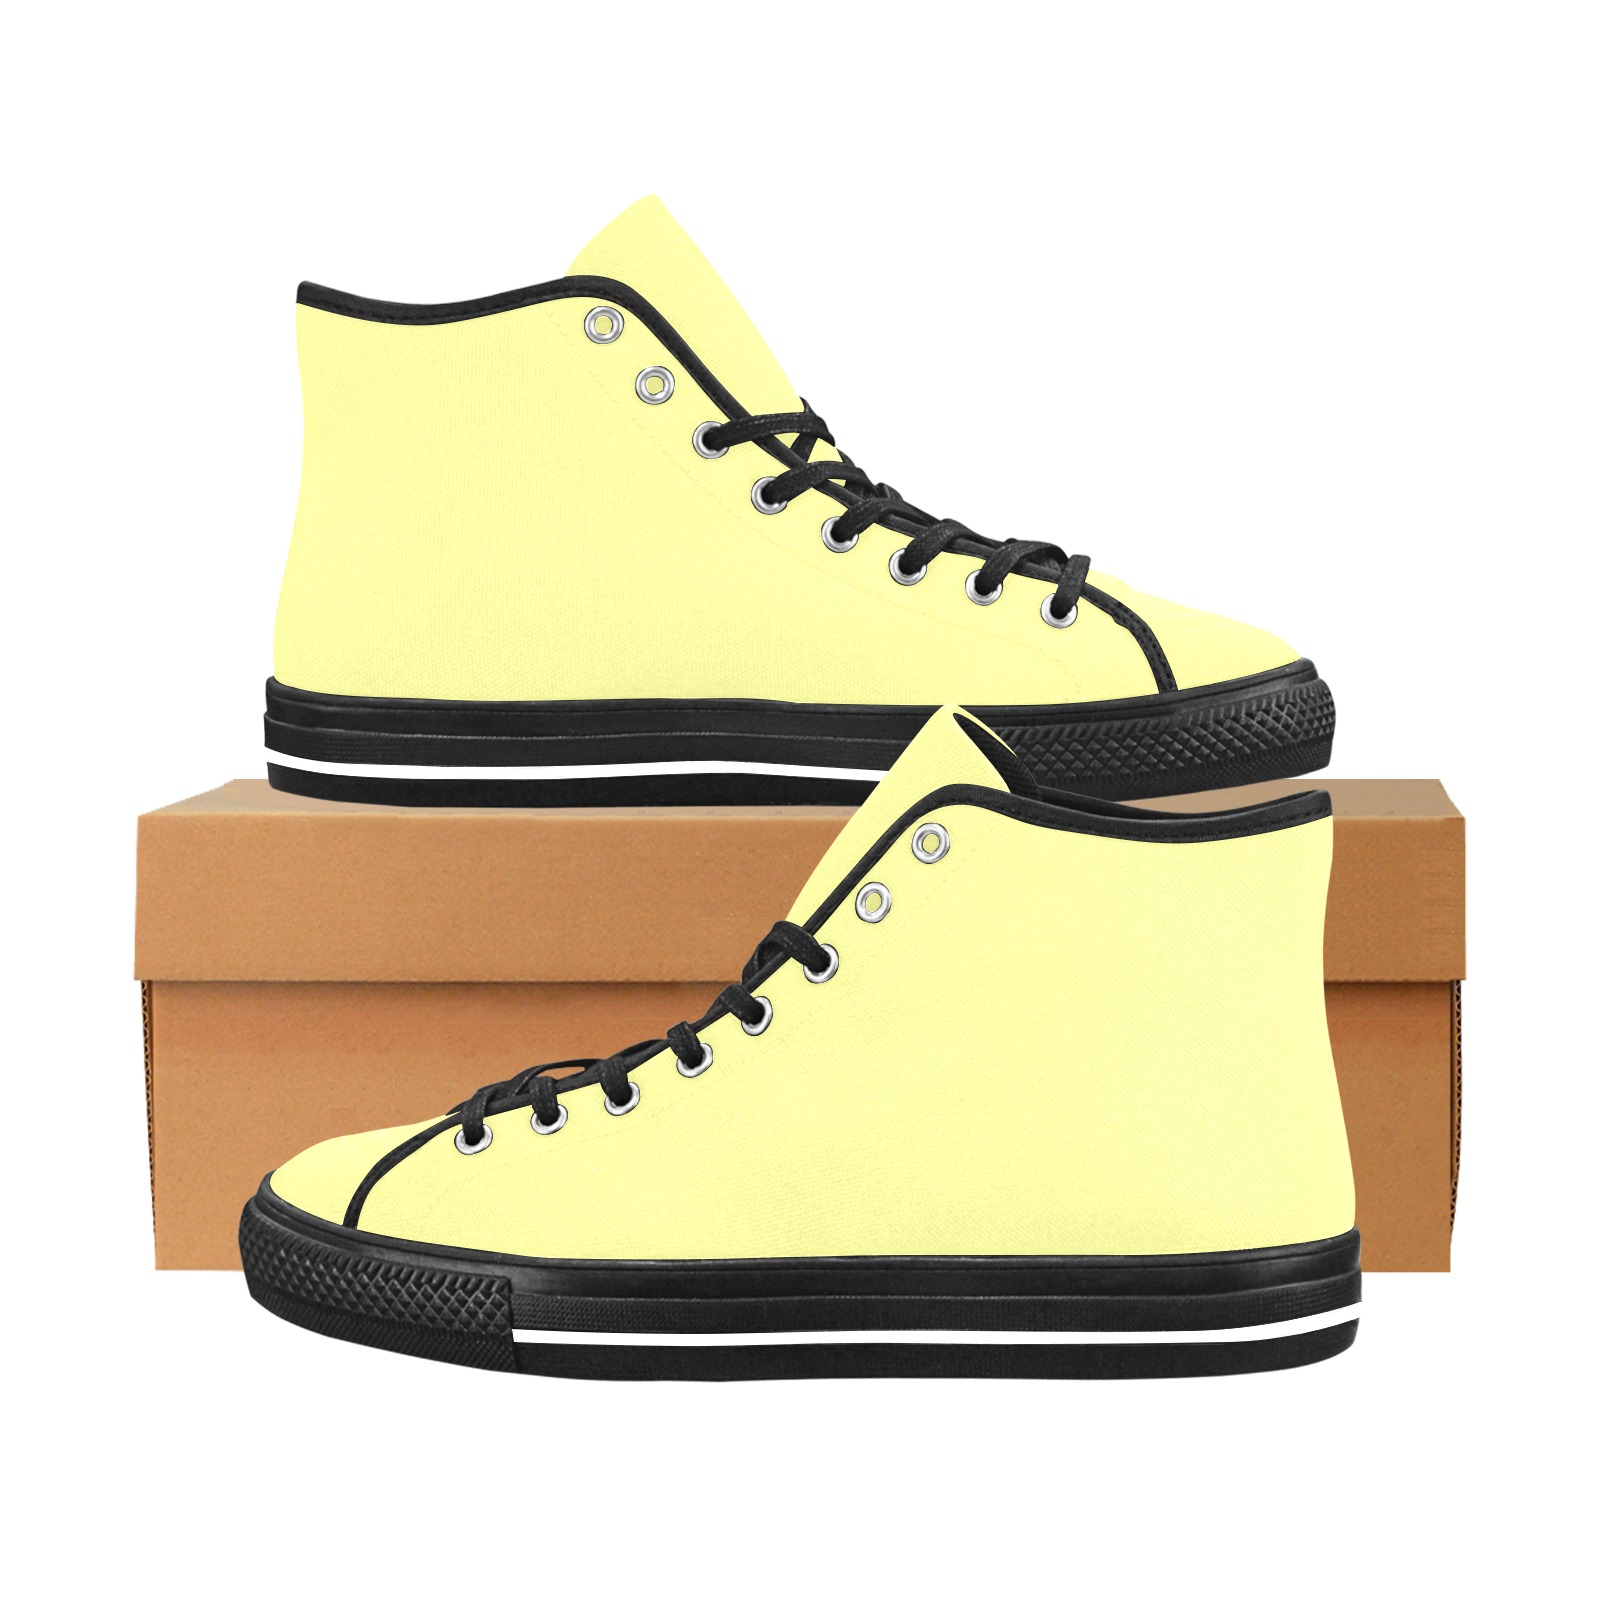 color canary yellow Vancouver H Women's Canvas Shoes (1013-1)